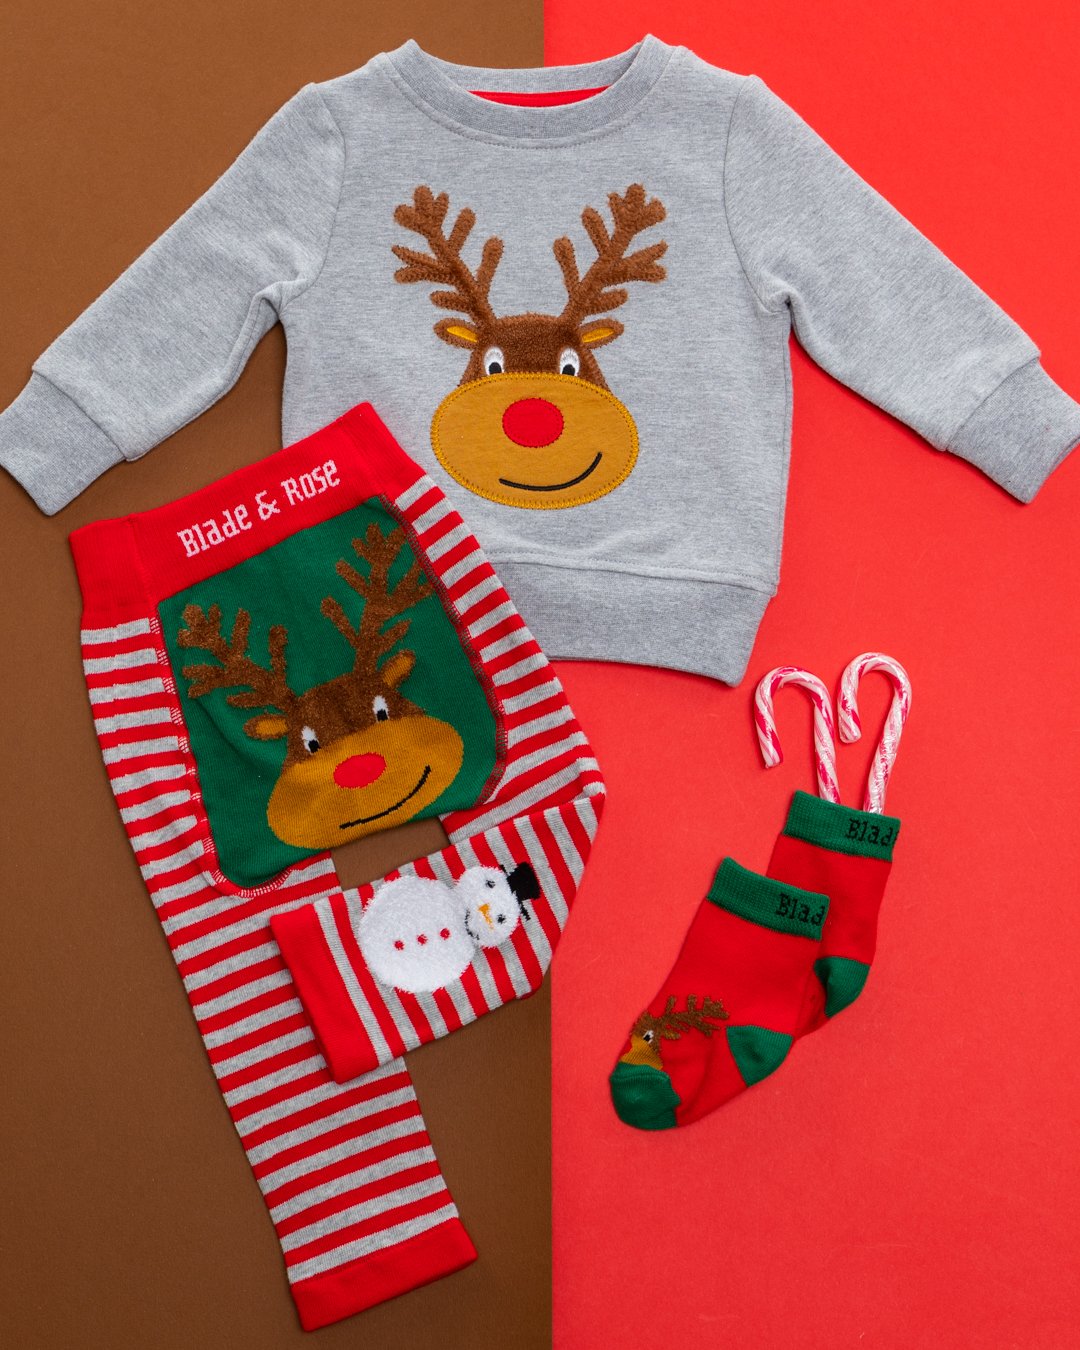 festive sweater with reindeer motif